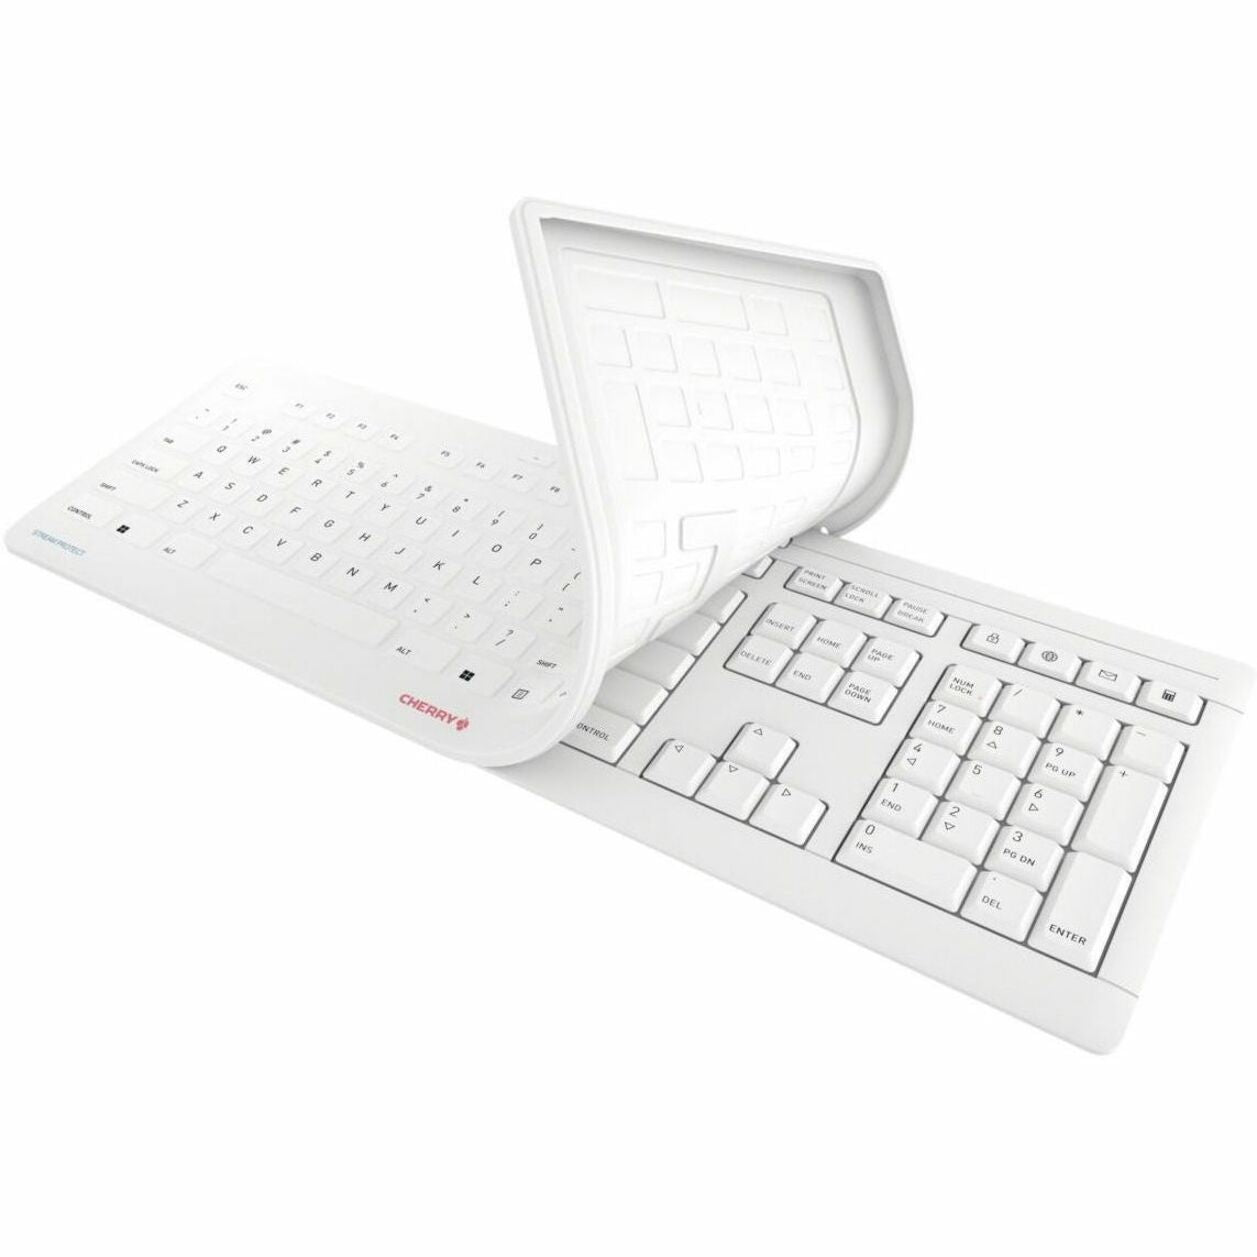 CHERRY JK-8552US-0 STREAM PROTECT Keyboard Wireless, Slim and Water Resistant